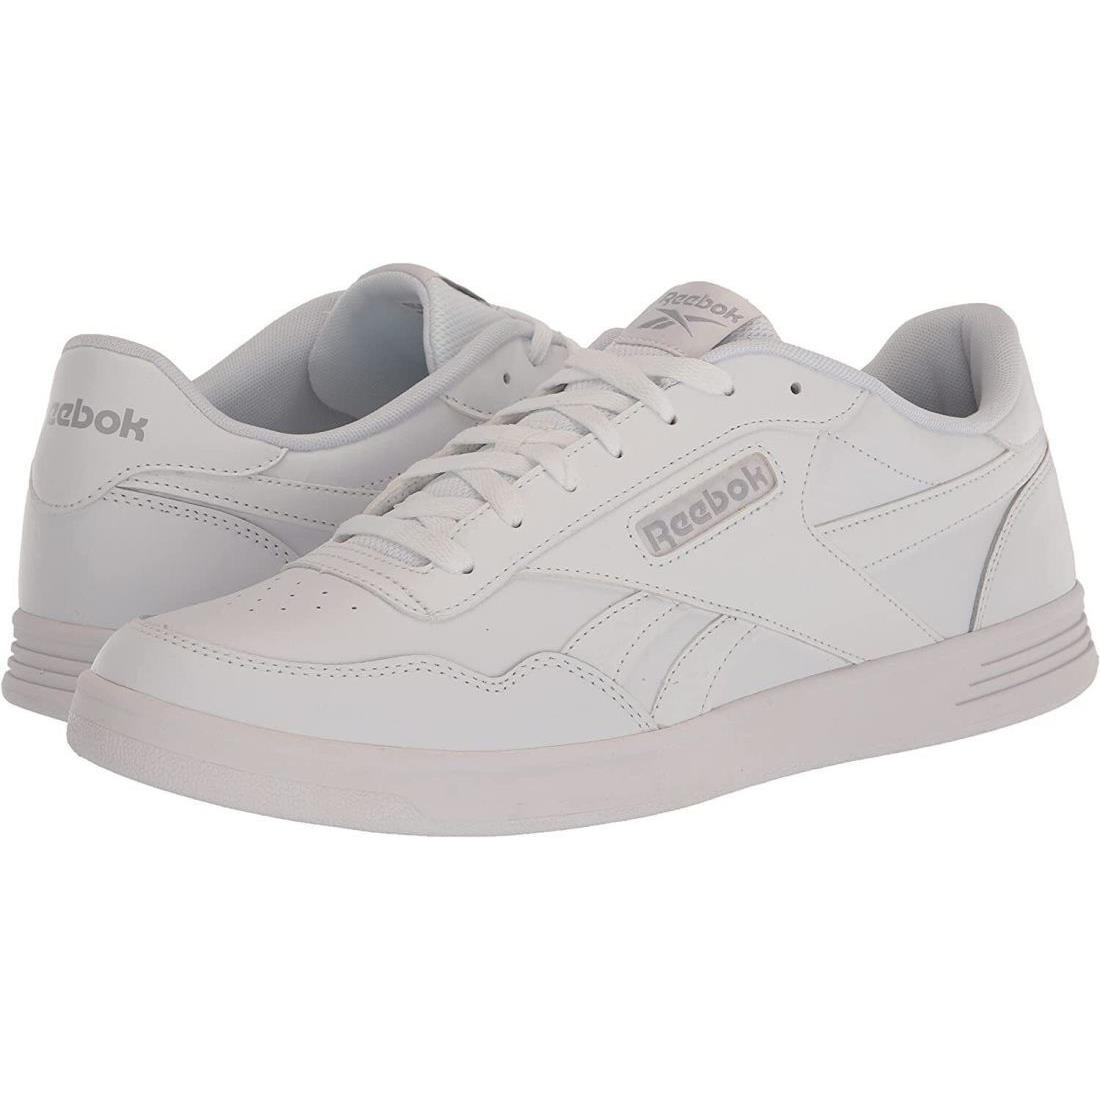 Unisex Adult Reebok Court Advance Sneaker GZ9620 Color White/cold Grey